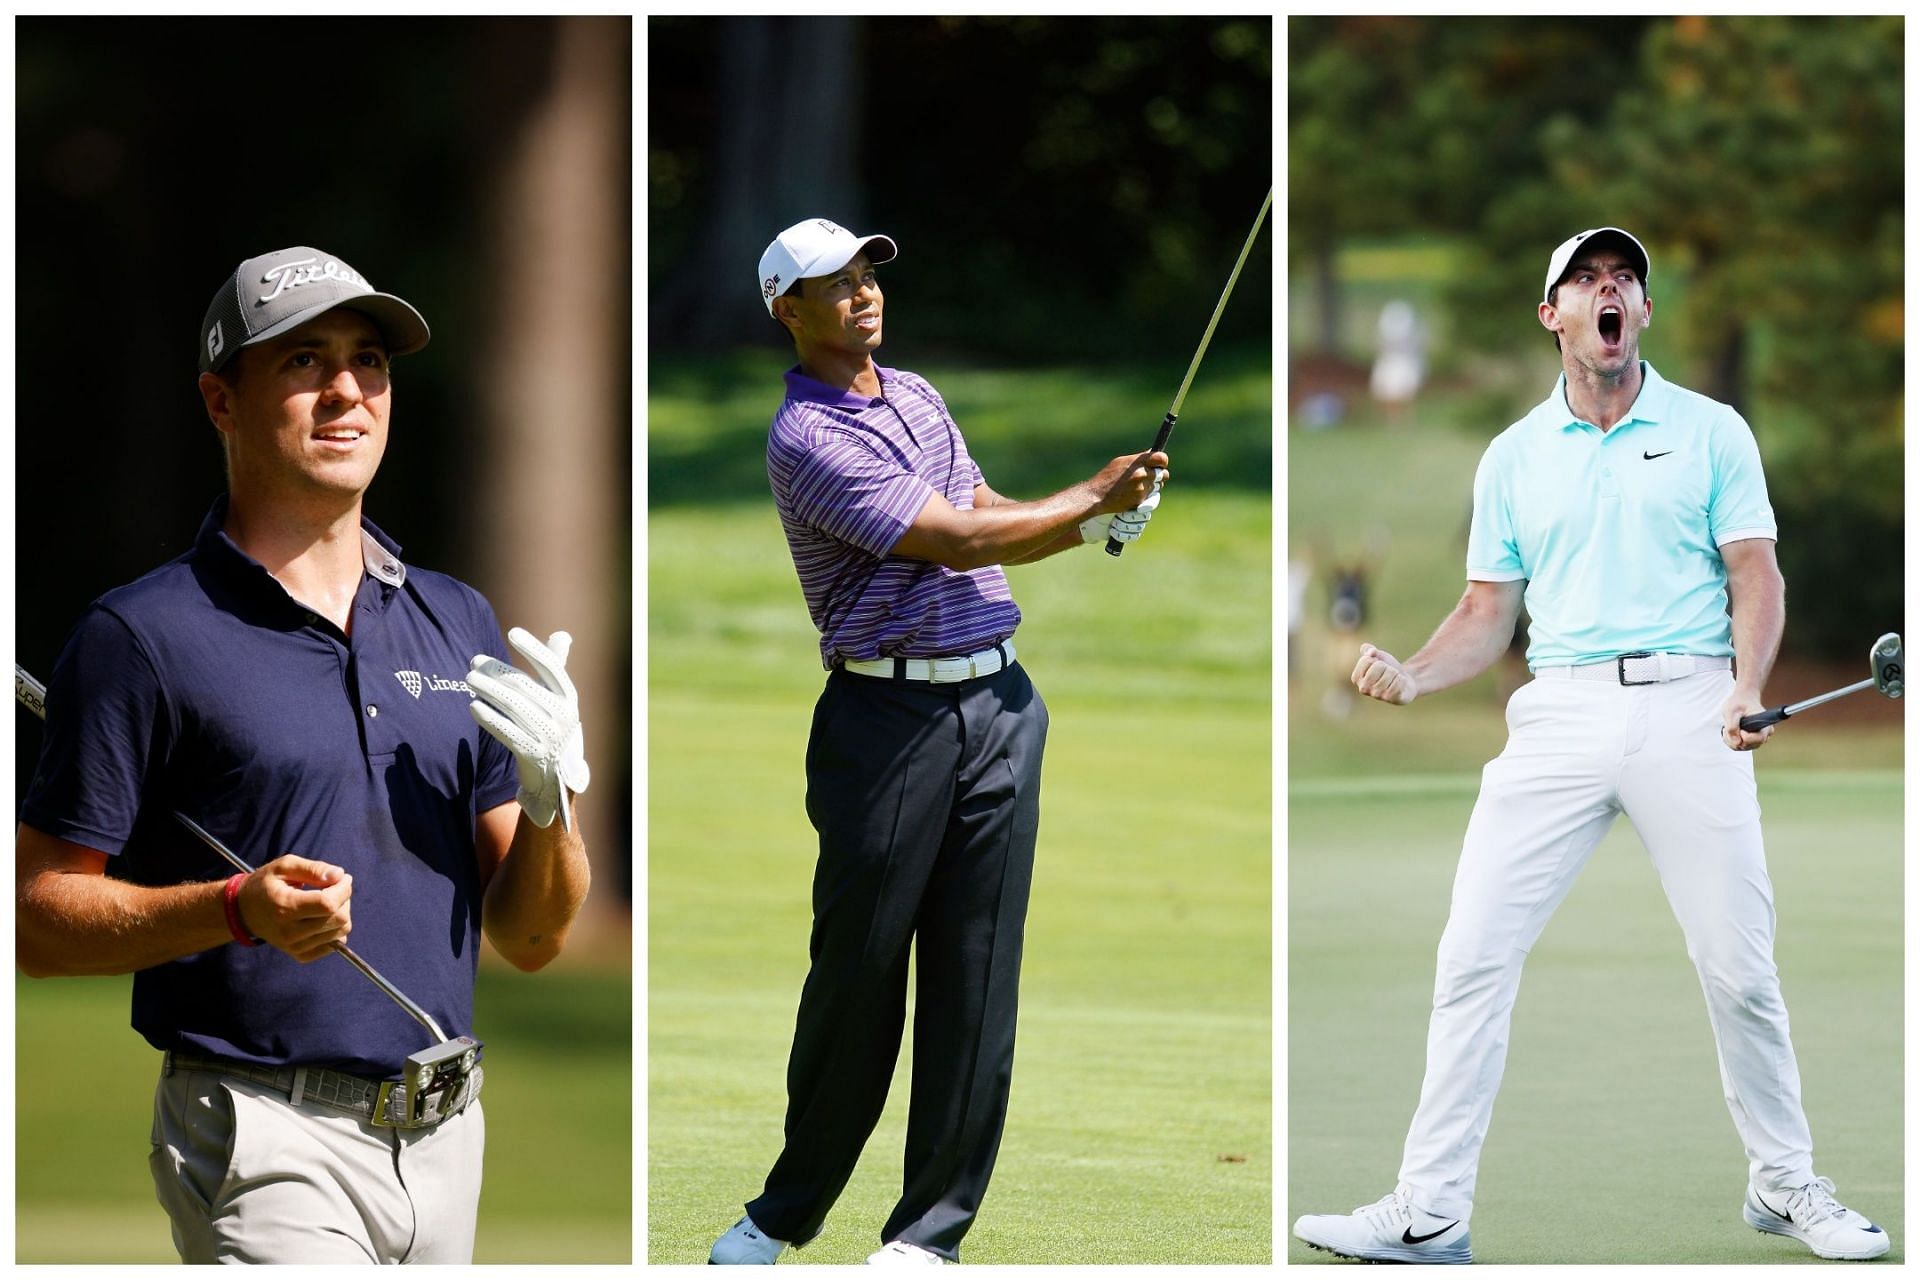 Justin Thomas, Tiger Woods and Rory McIlroy are among the highest earners at the FedEx Cup